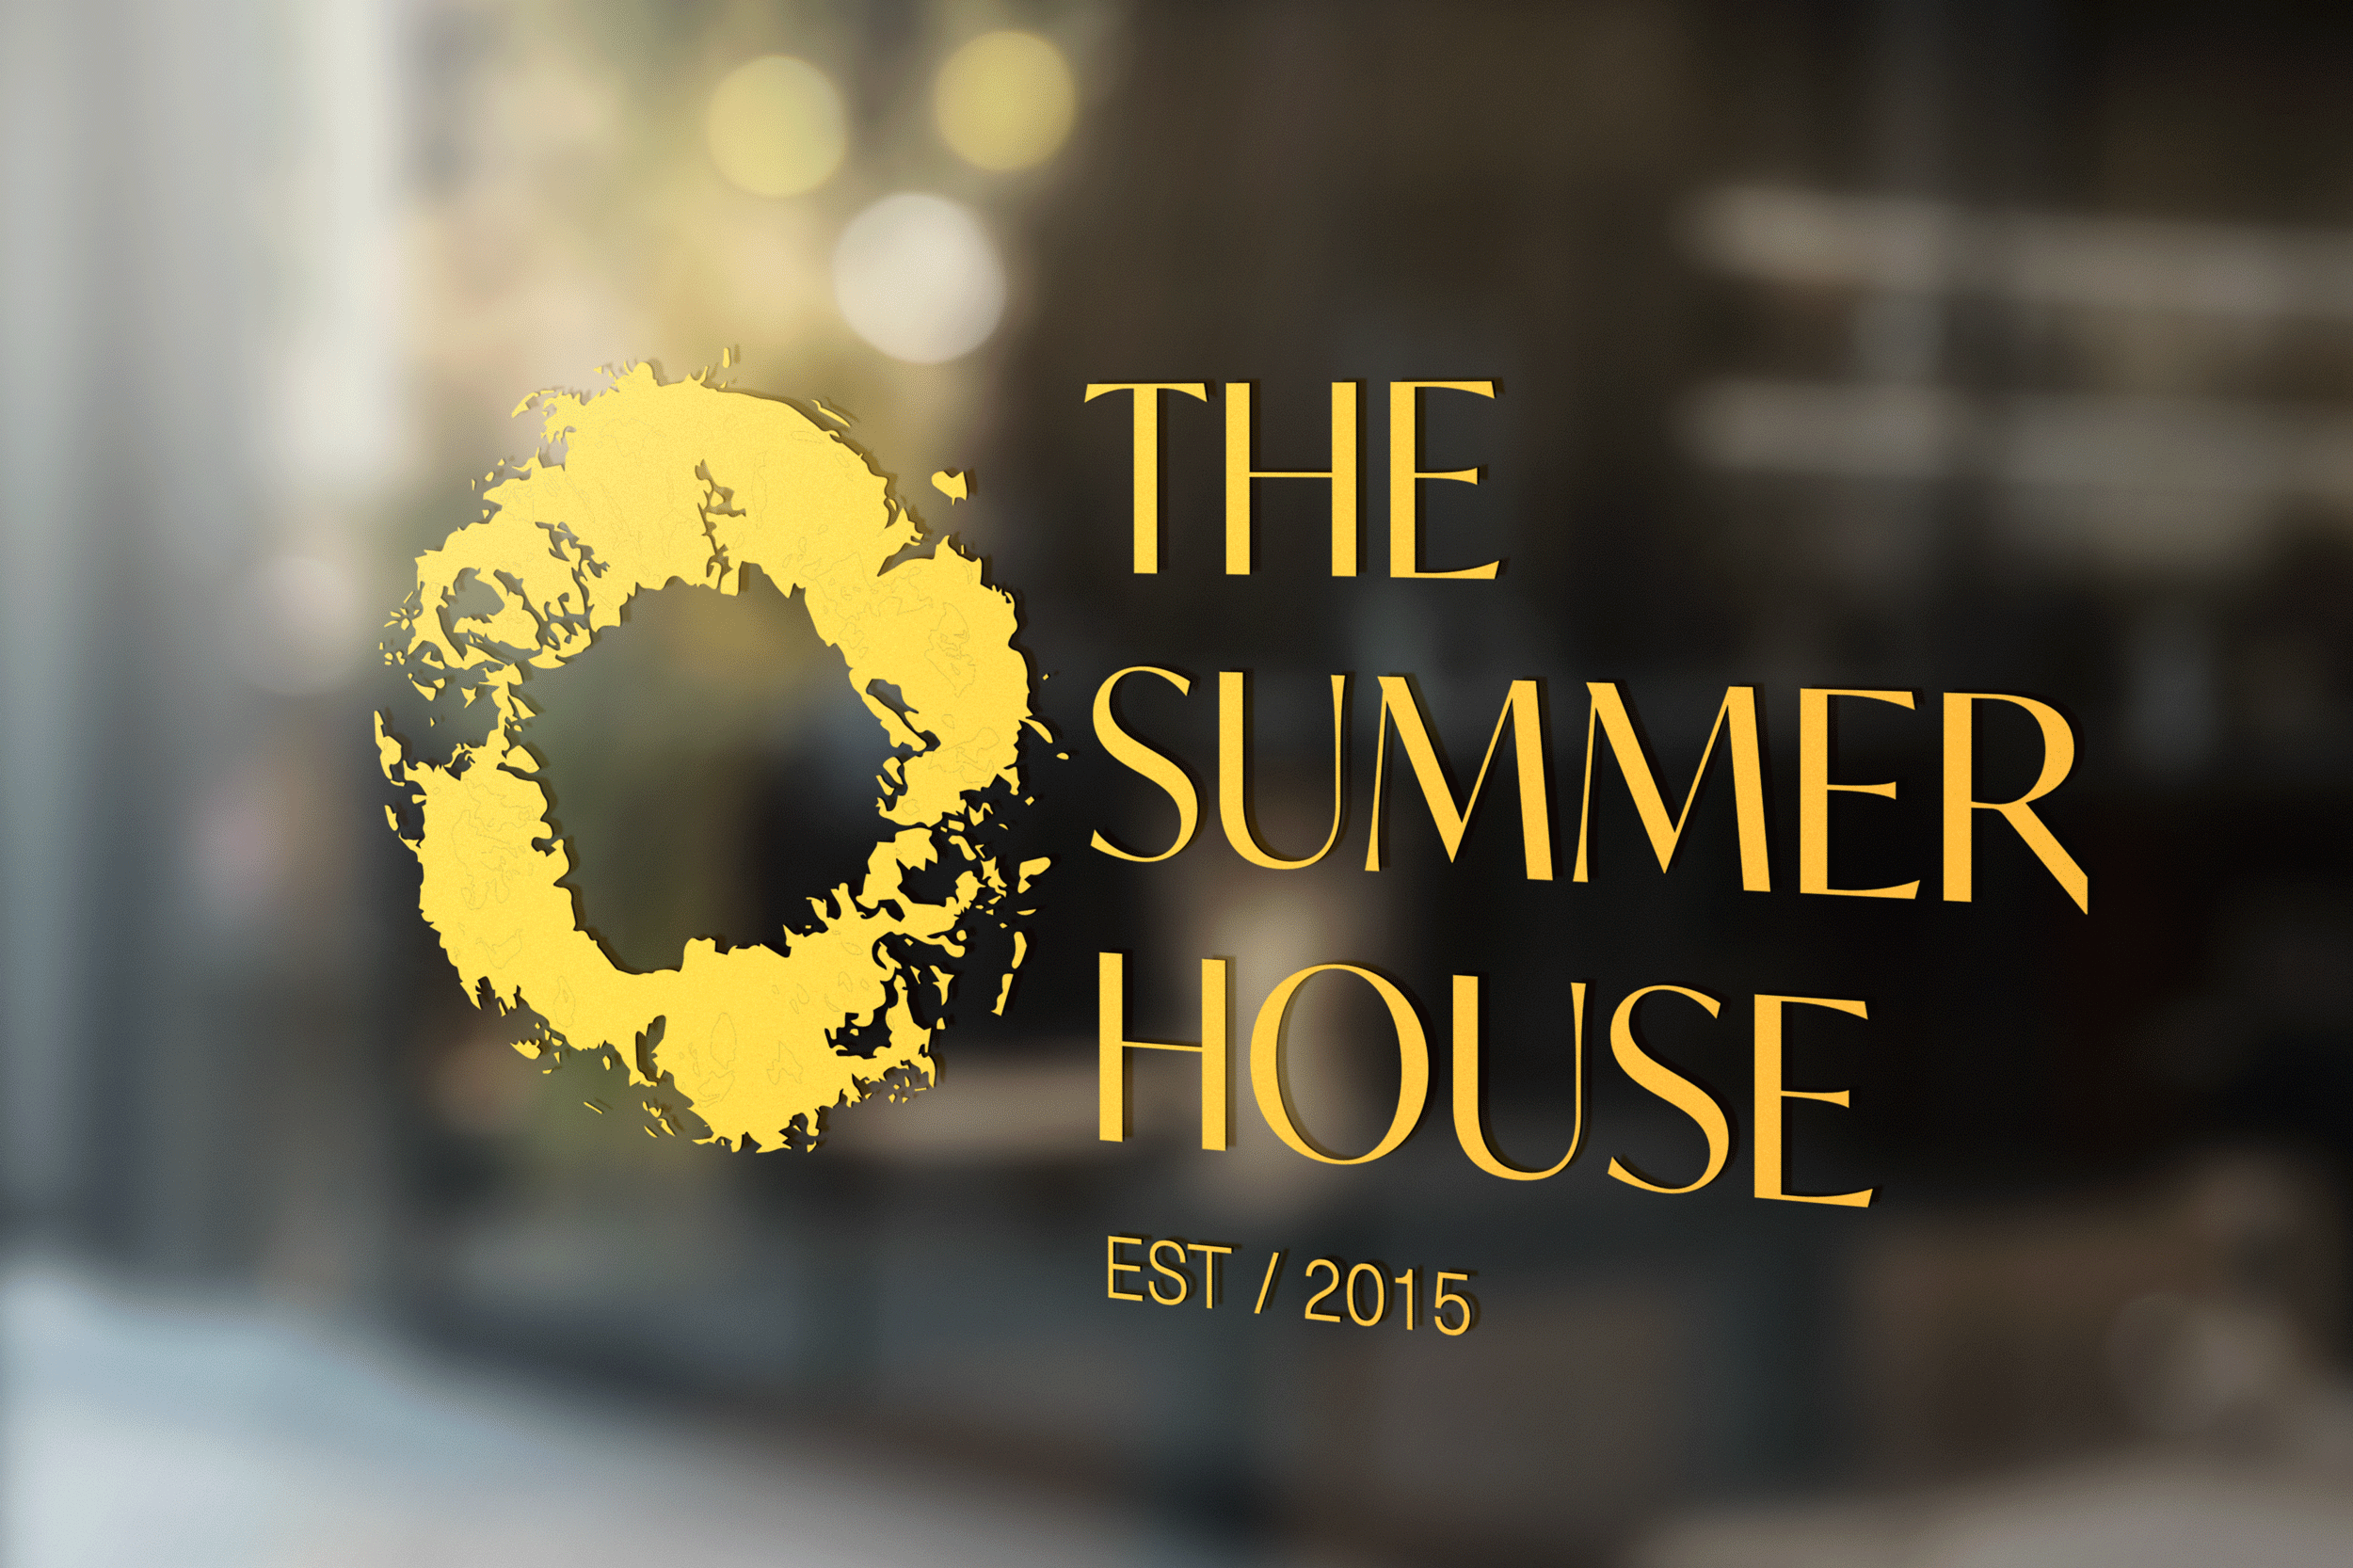 An icon and typographic logo with print made from a ring of pineapple on the left, and narrow art deco style serif type which reads THE SUMMER HOUSE, all in gold foil on a glass surface